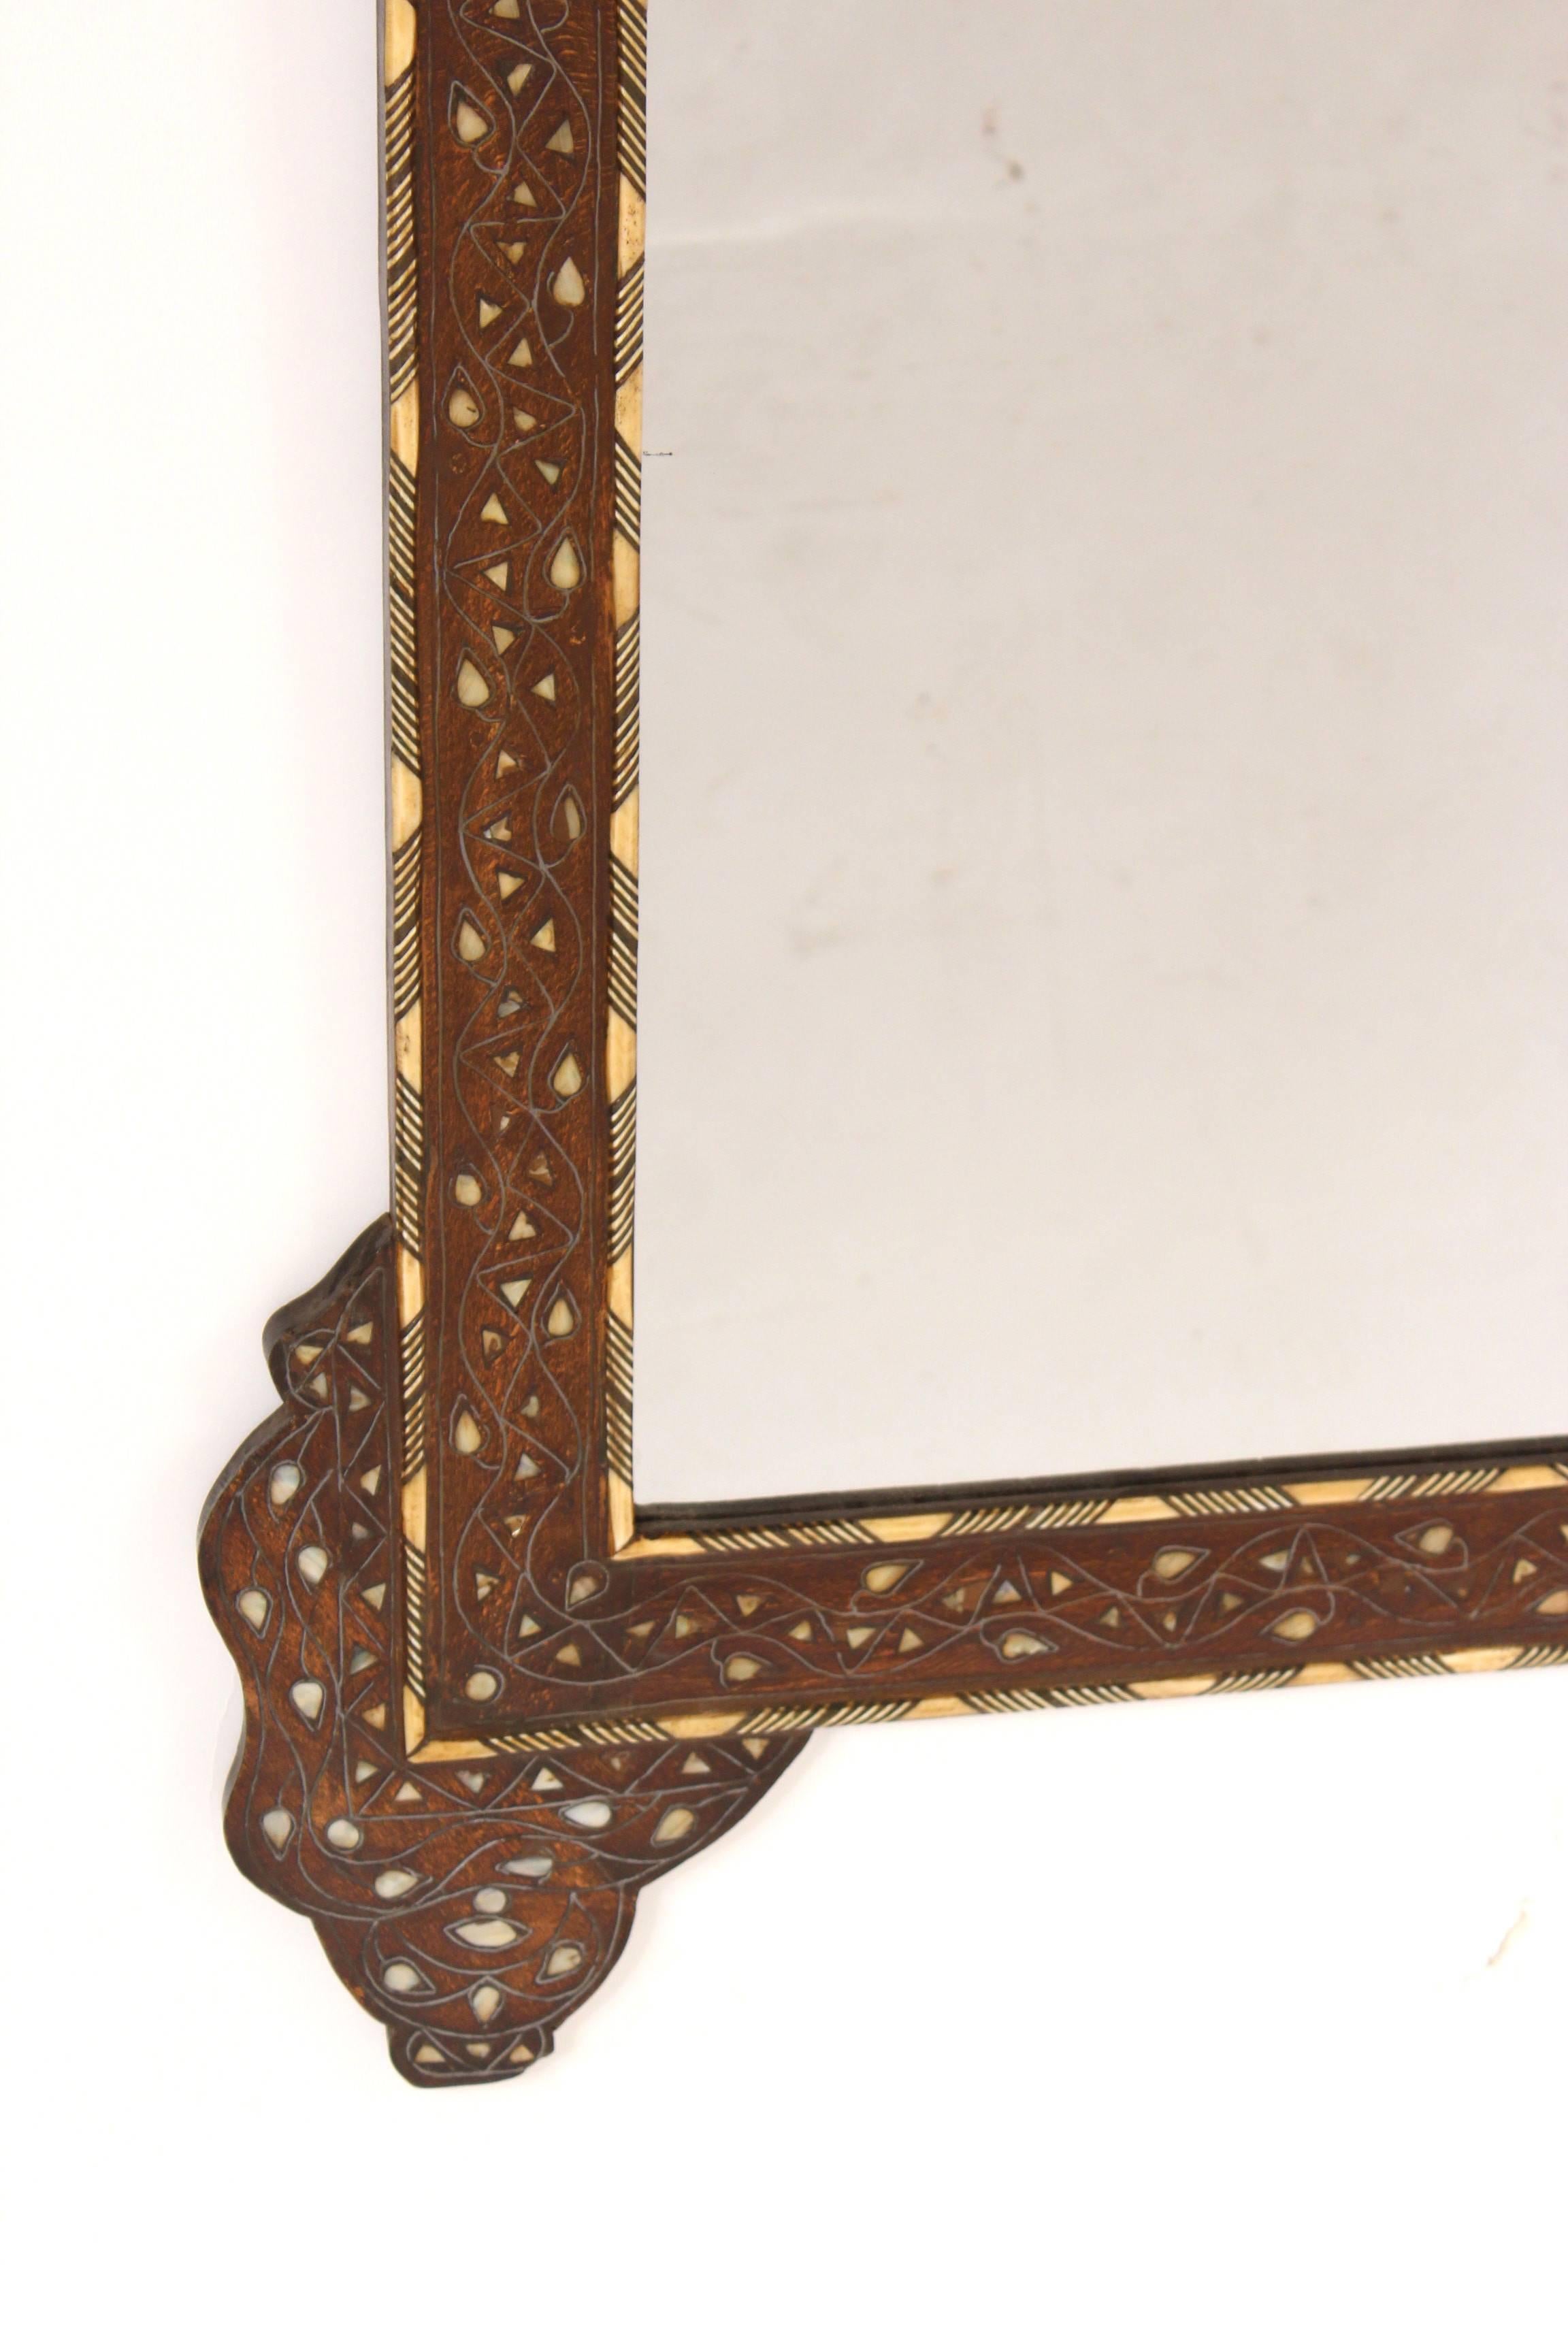 Moorish Middle Eastern Mother-of-Pearl Inlaid Mirror